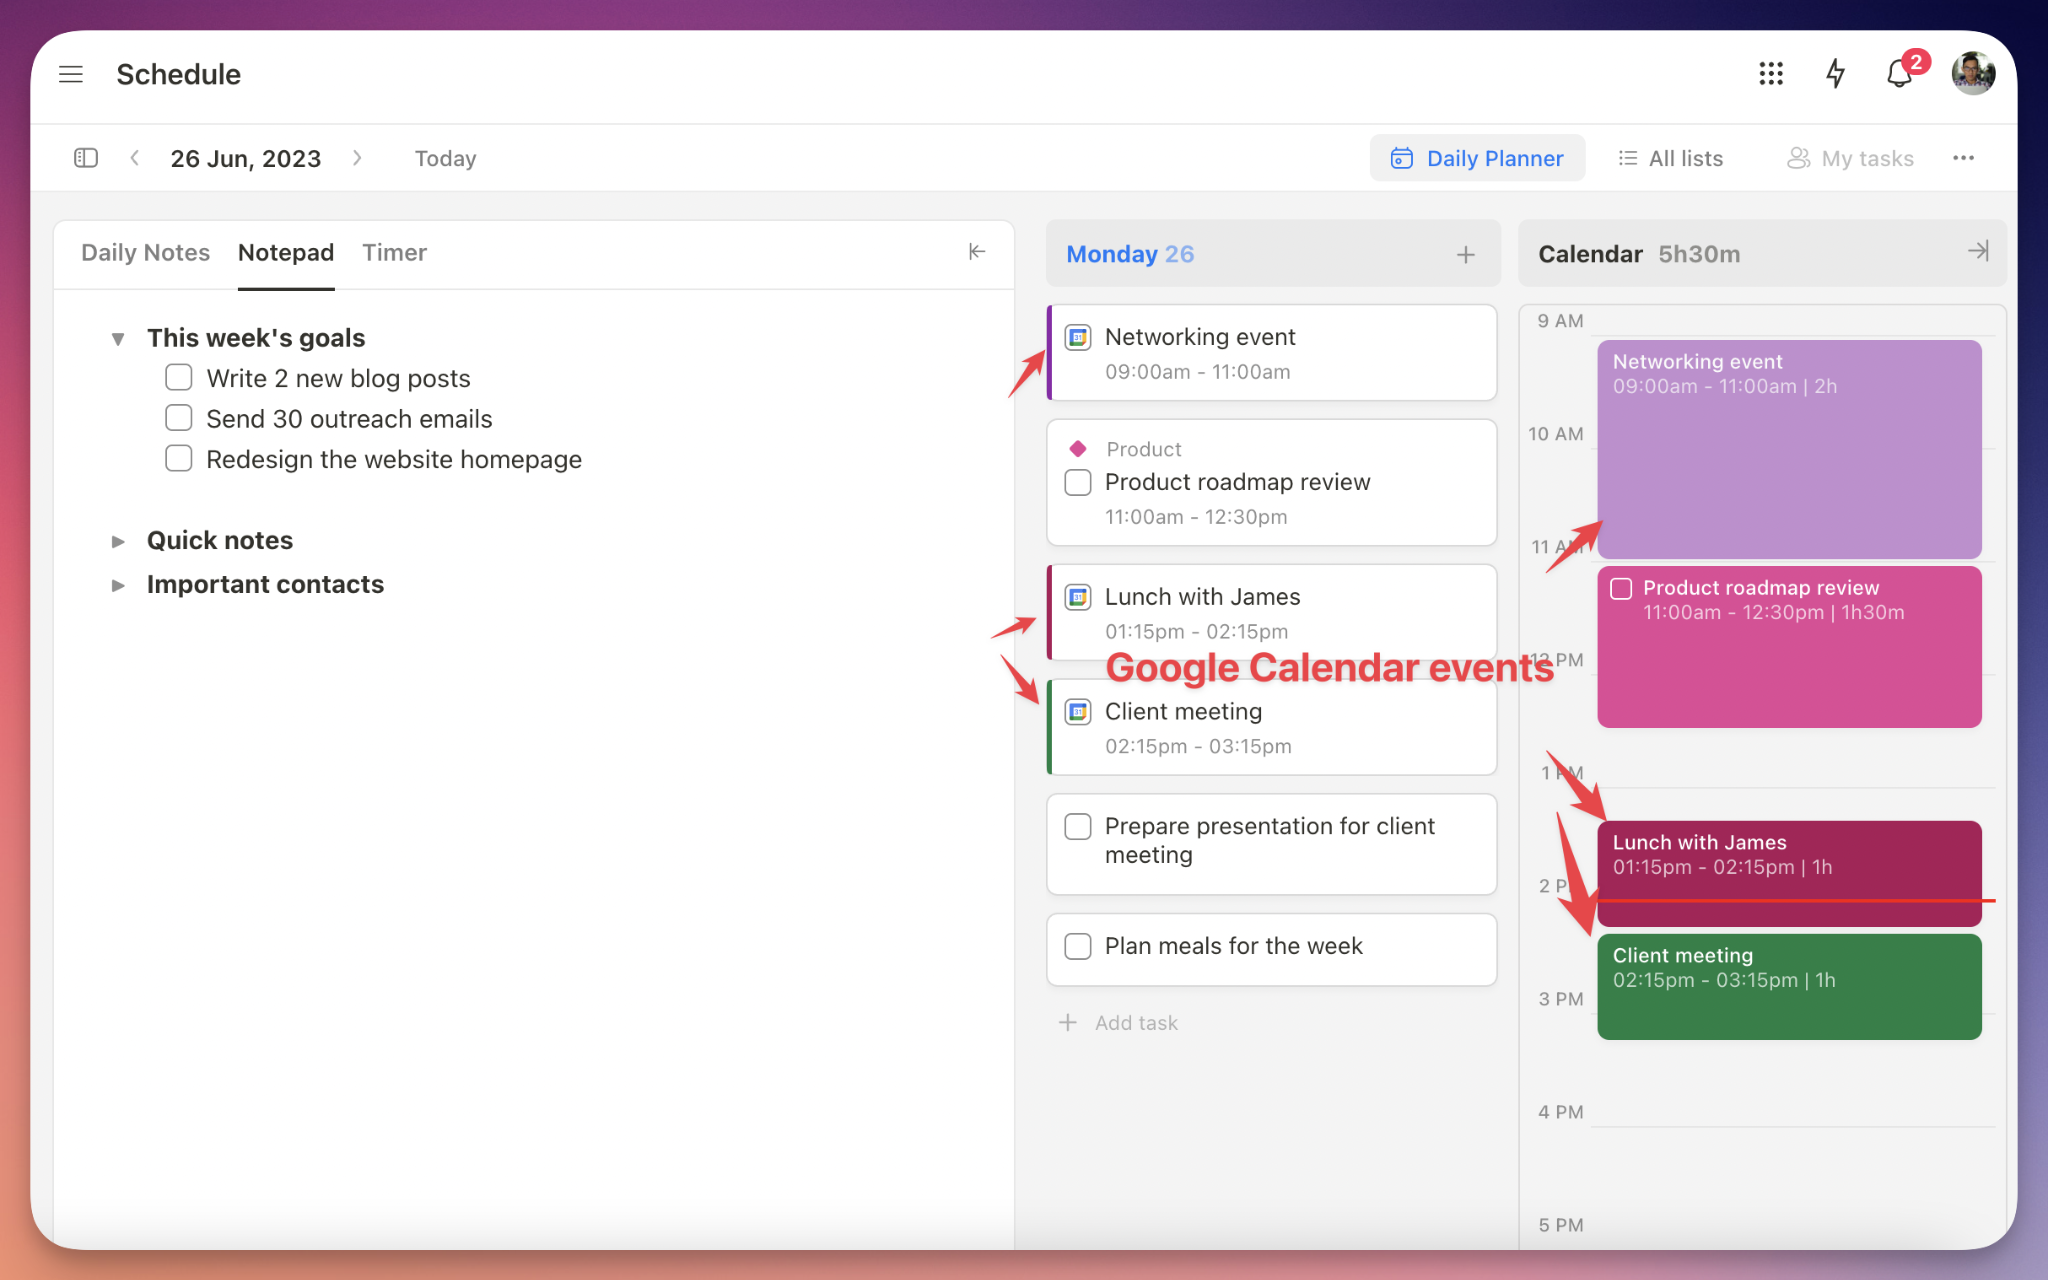 Upbase supports two-way sync with Google Calendar